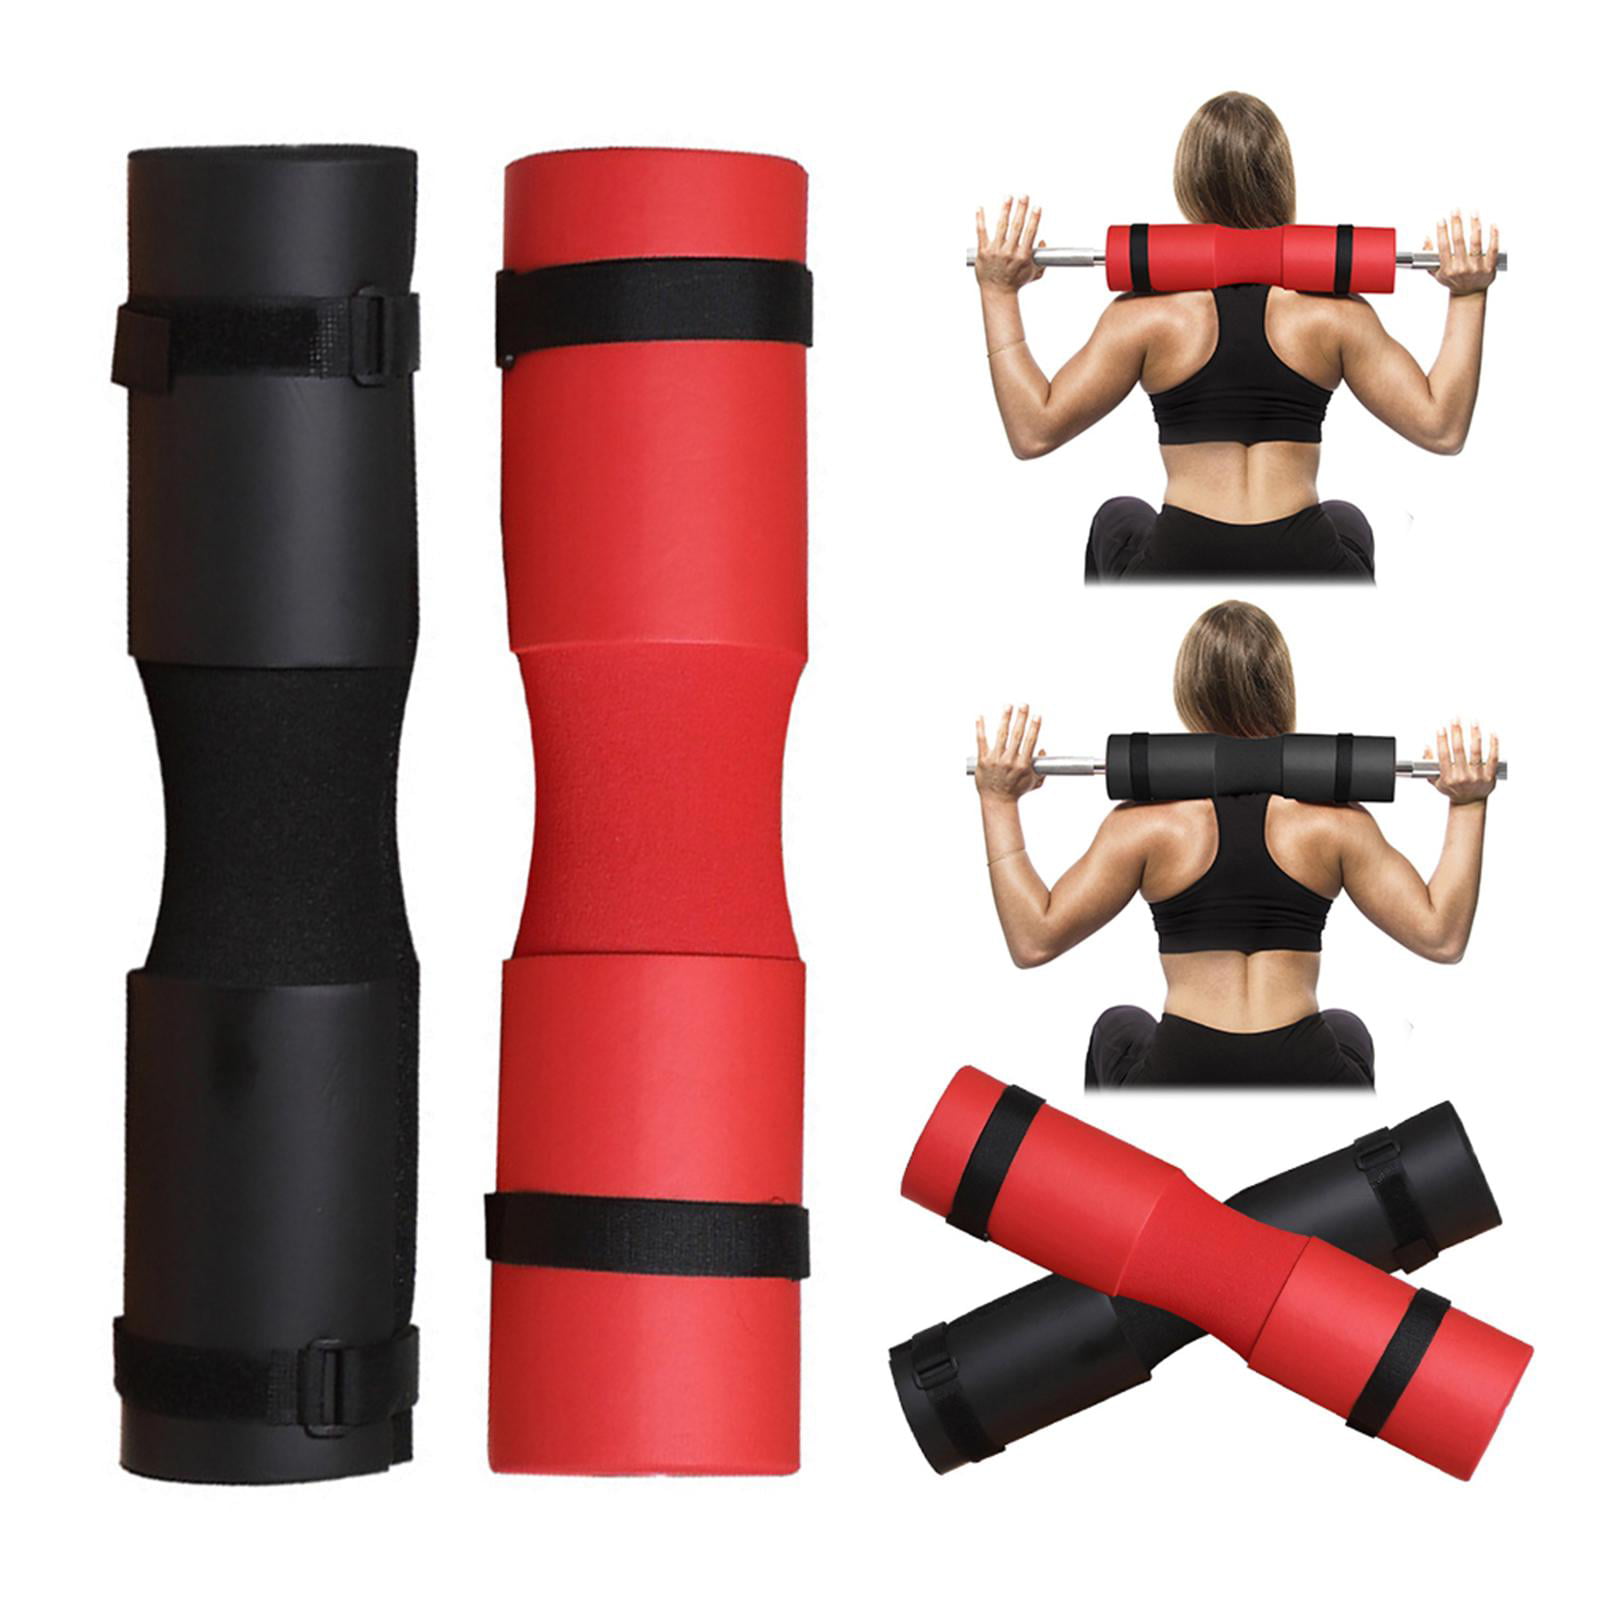 Foam Padded Barbell Bar Cover Squat Pad Weight Lifting Shoulder Back Protector 